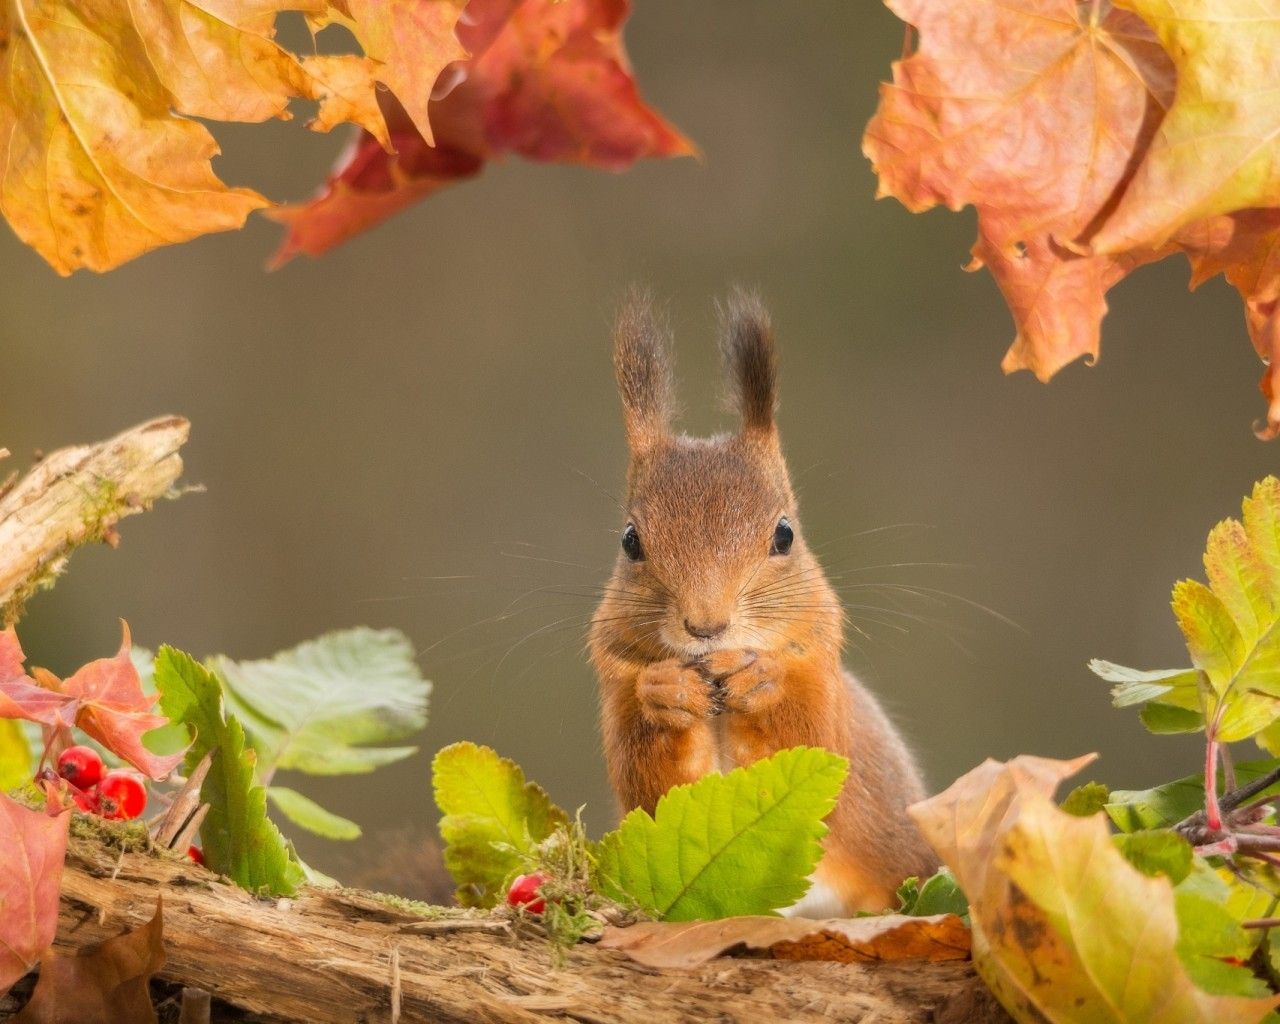 Download 1280x1024 Squirrel, Eating, Leaves, Autumn, Rodent Wallpaper